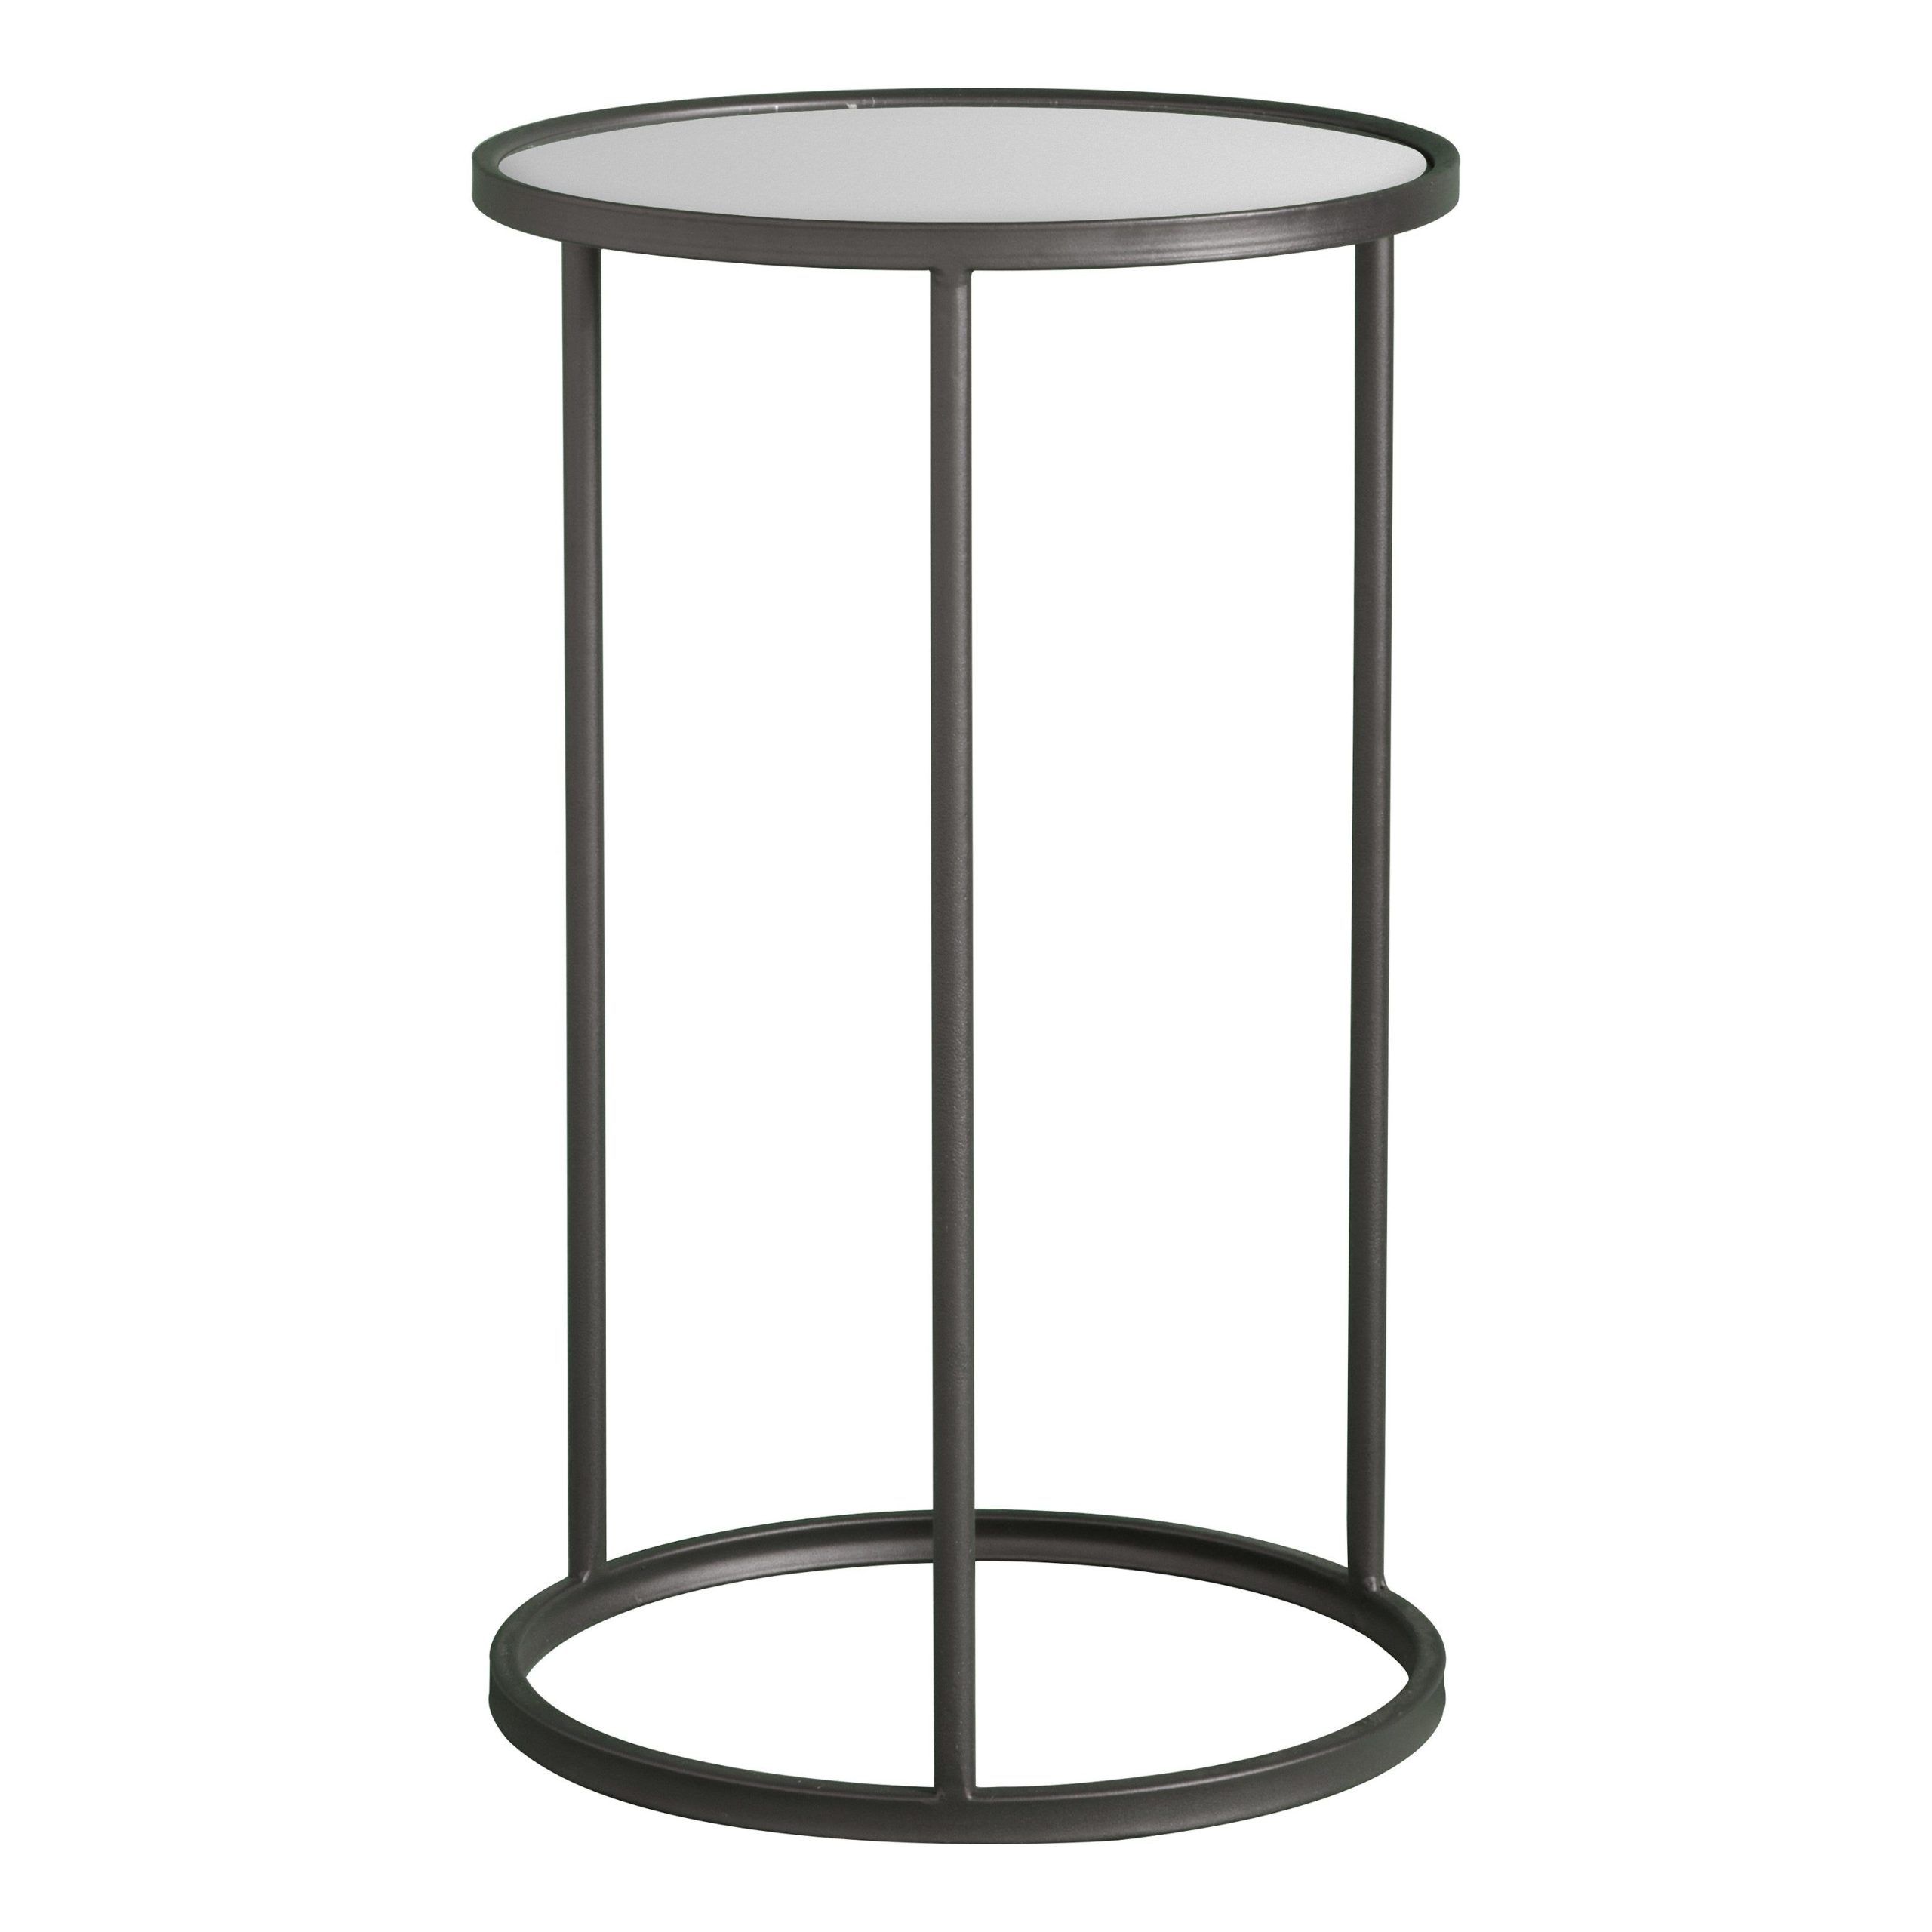 Huttone Side Table | Metal Side Table, Side Table, Mirror Side Table Intended For Metal Side Tables For Living Spaces (View 5 of 20)